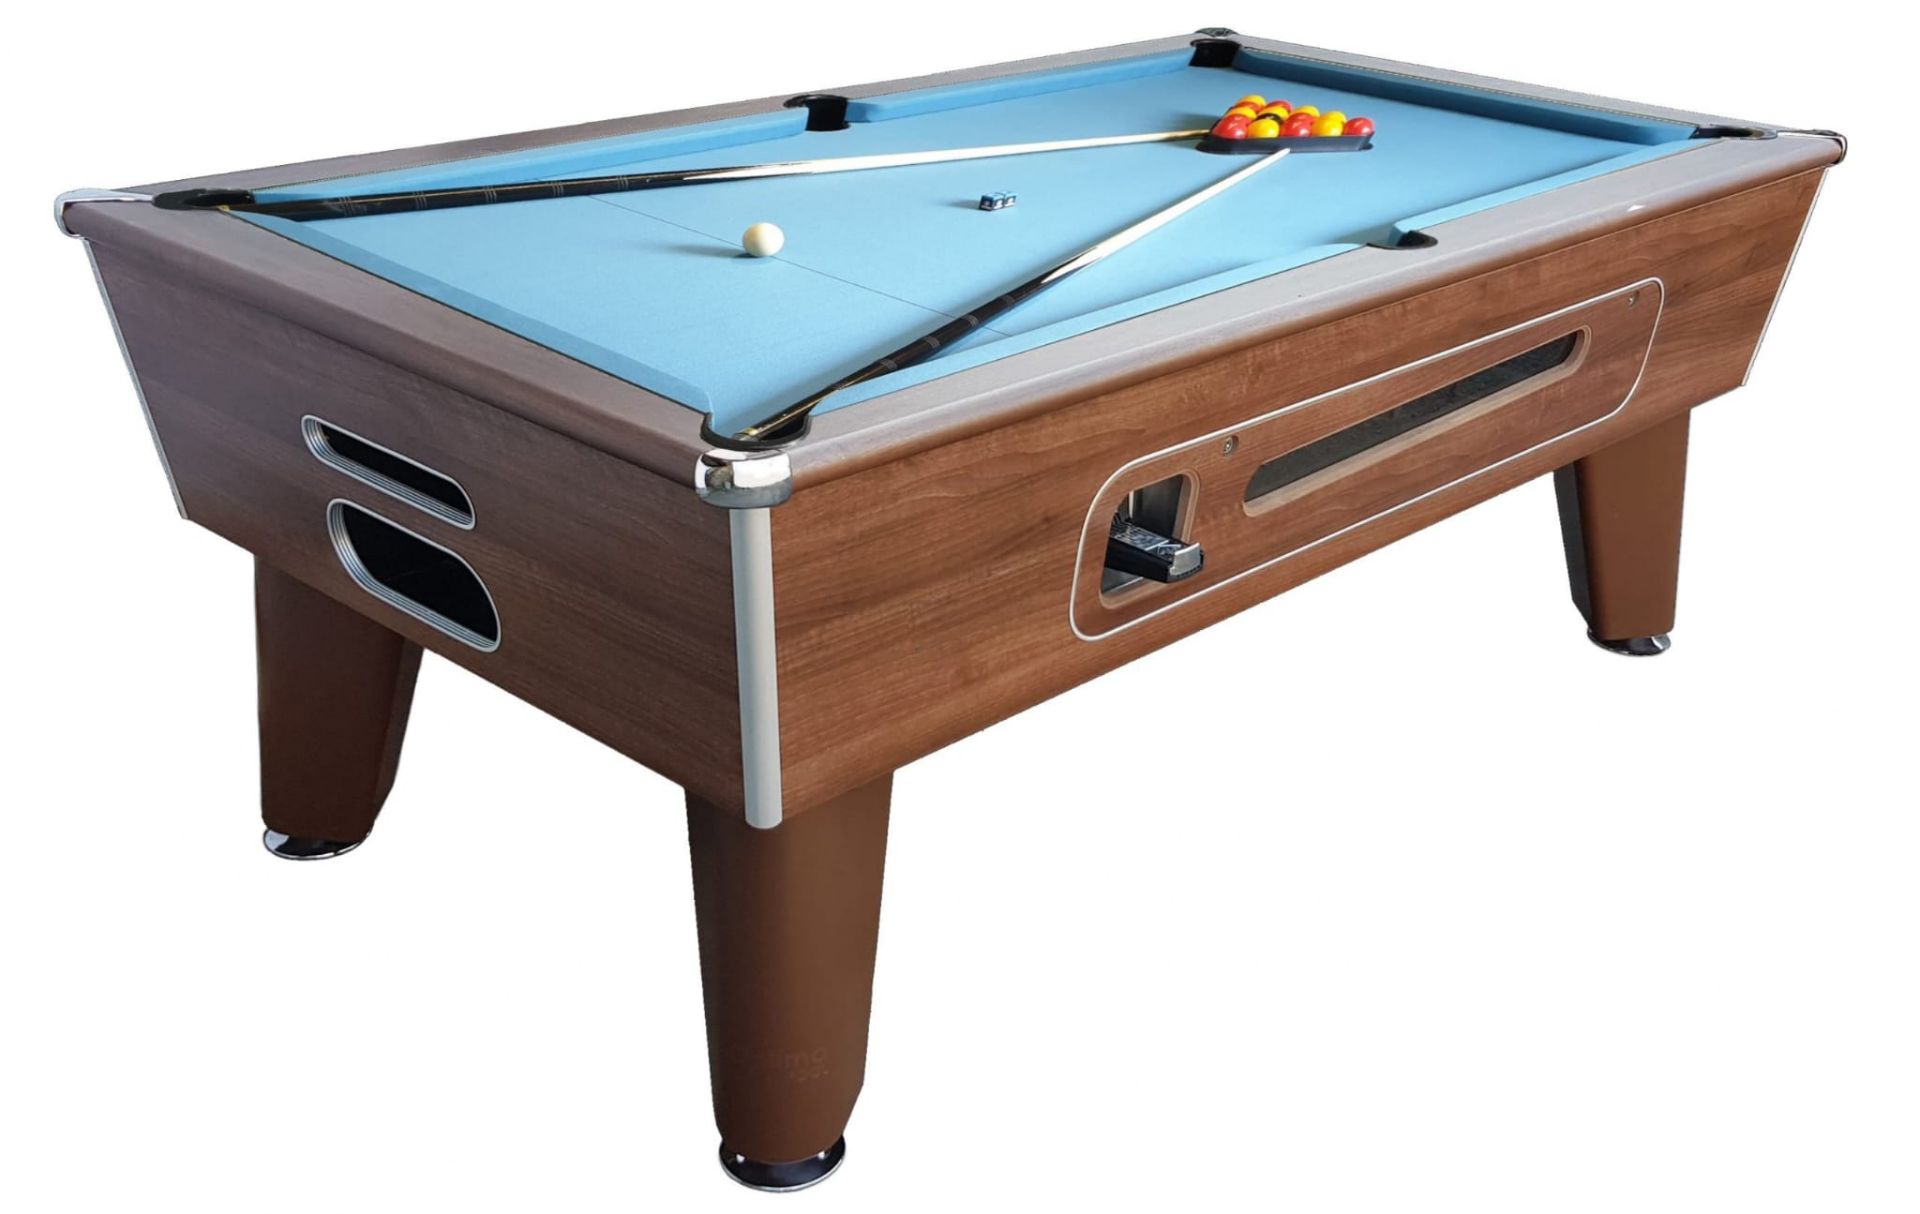 NEW POOL TABLE BARLINE TABLE 7X4 COIN OPERATED AND FREE PLAY - Image 3 of 3